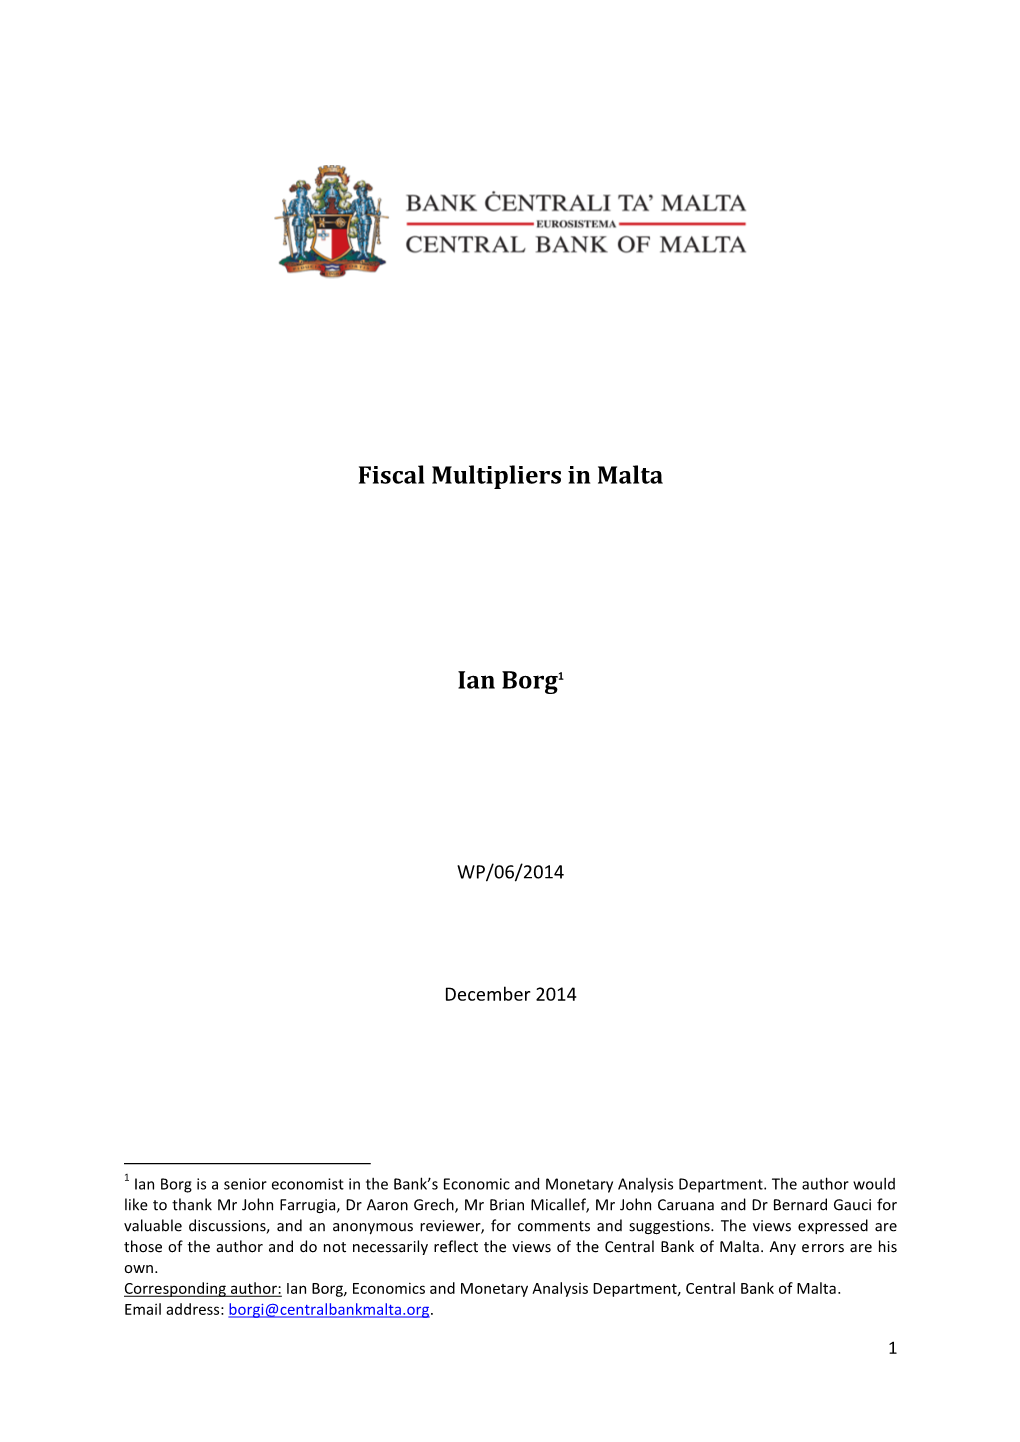 Fiscal Multipliers in Malta